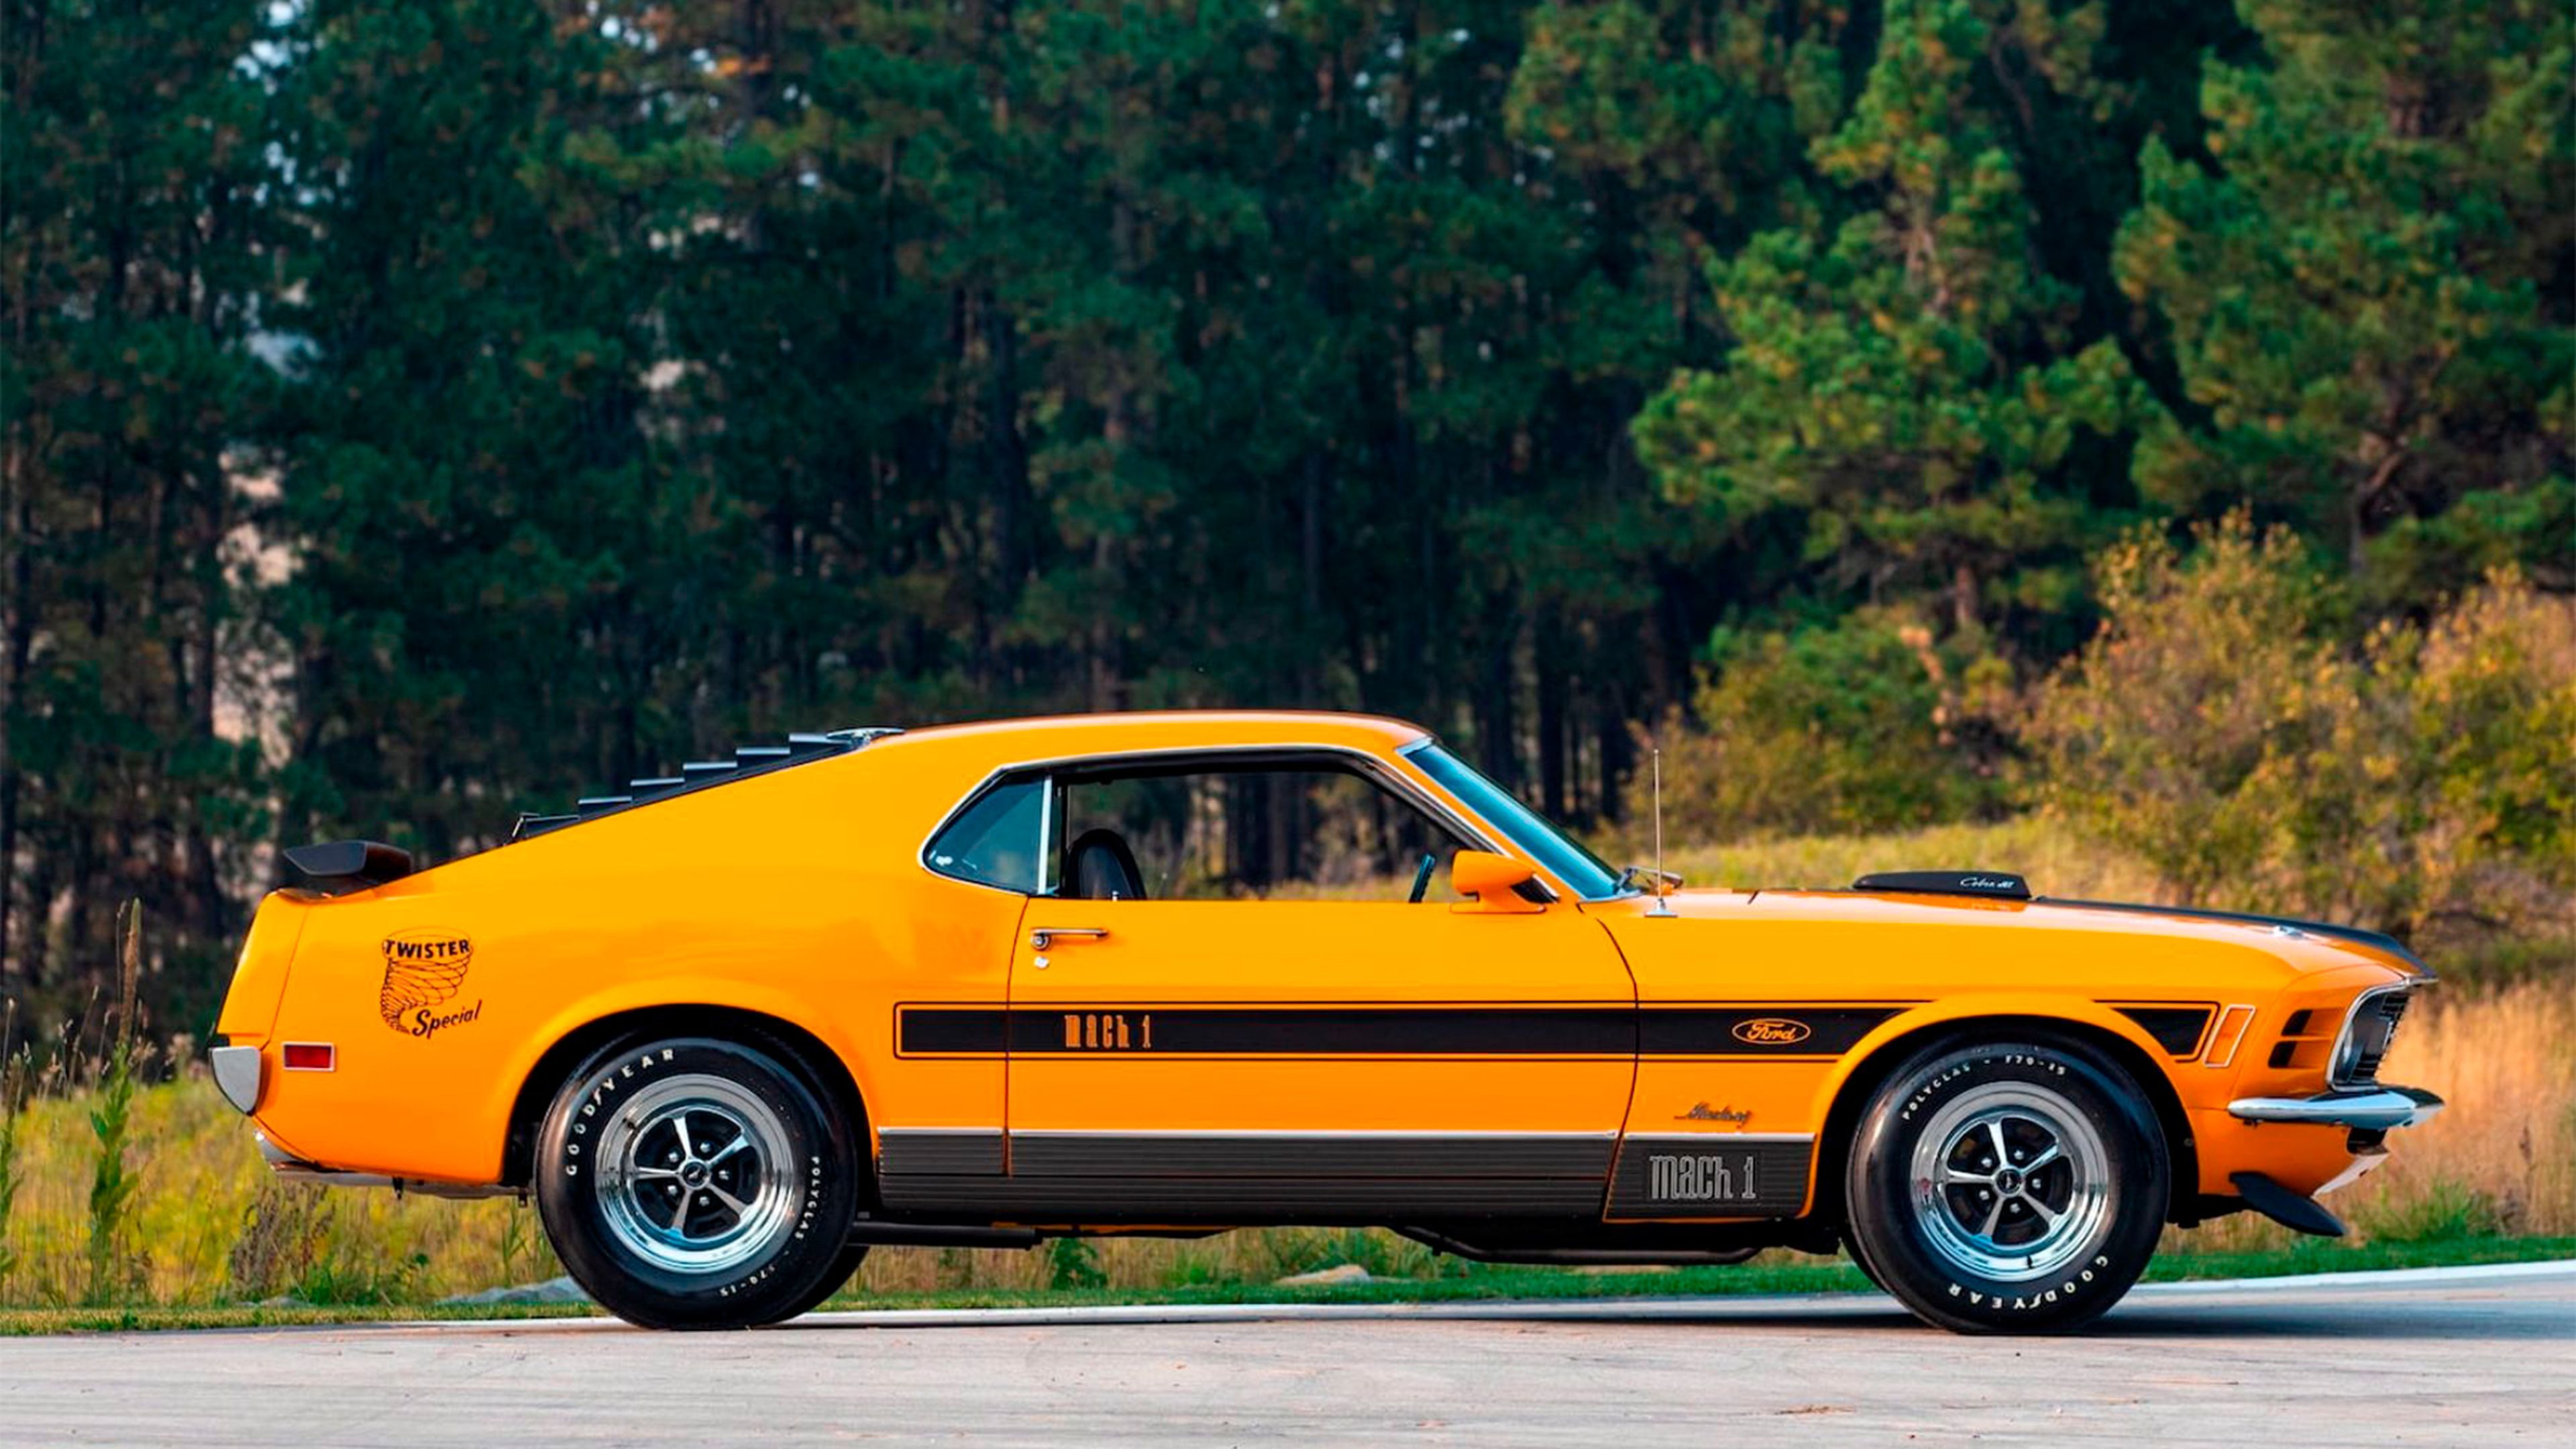 Ford Mustang Mach 1 Twister Special de 1970